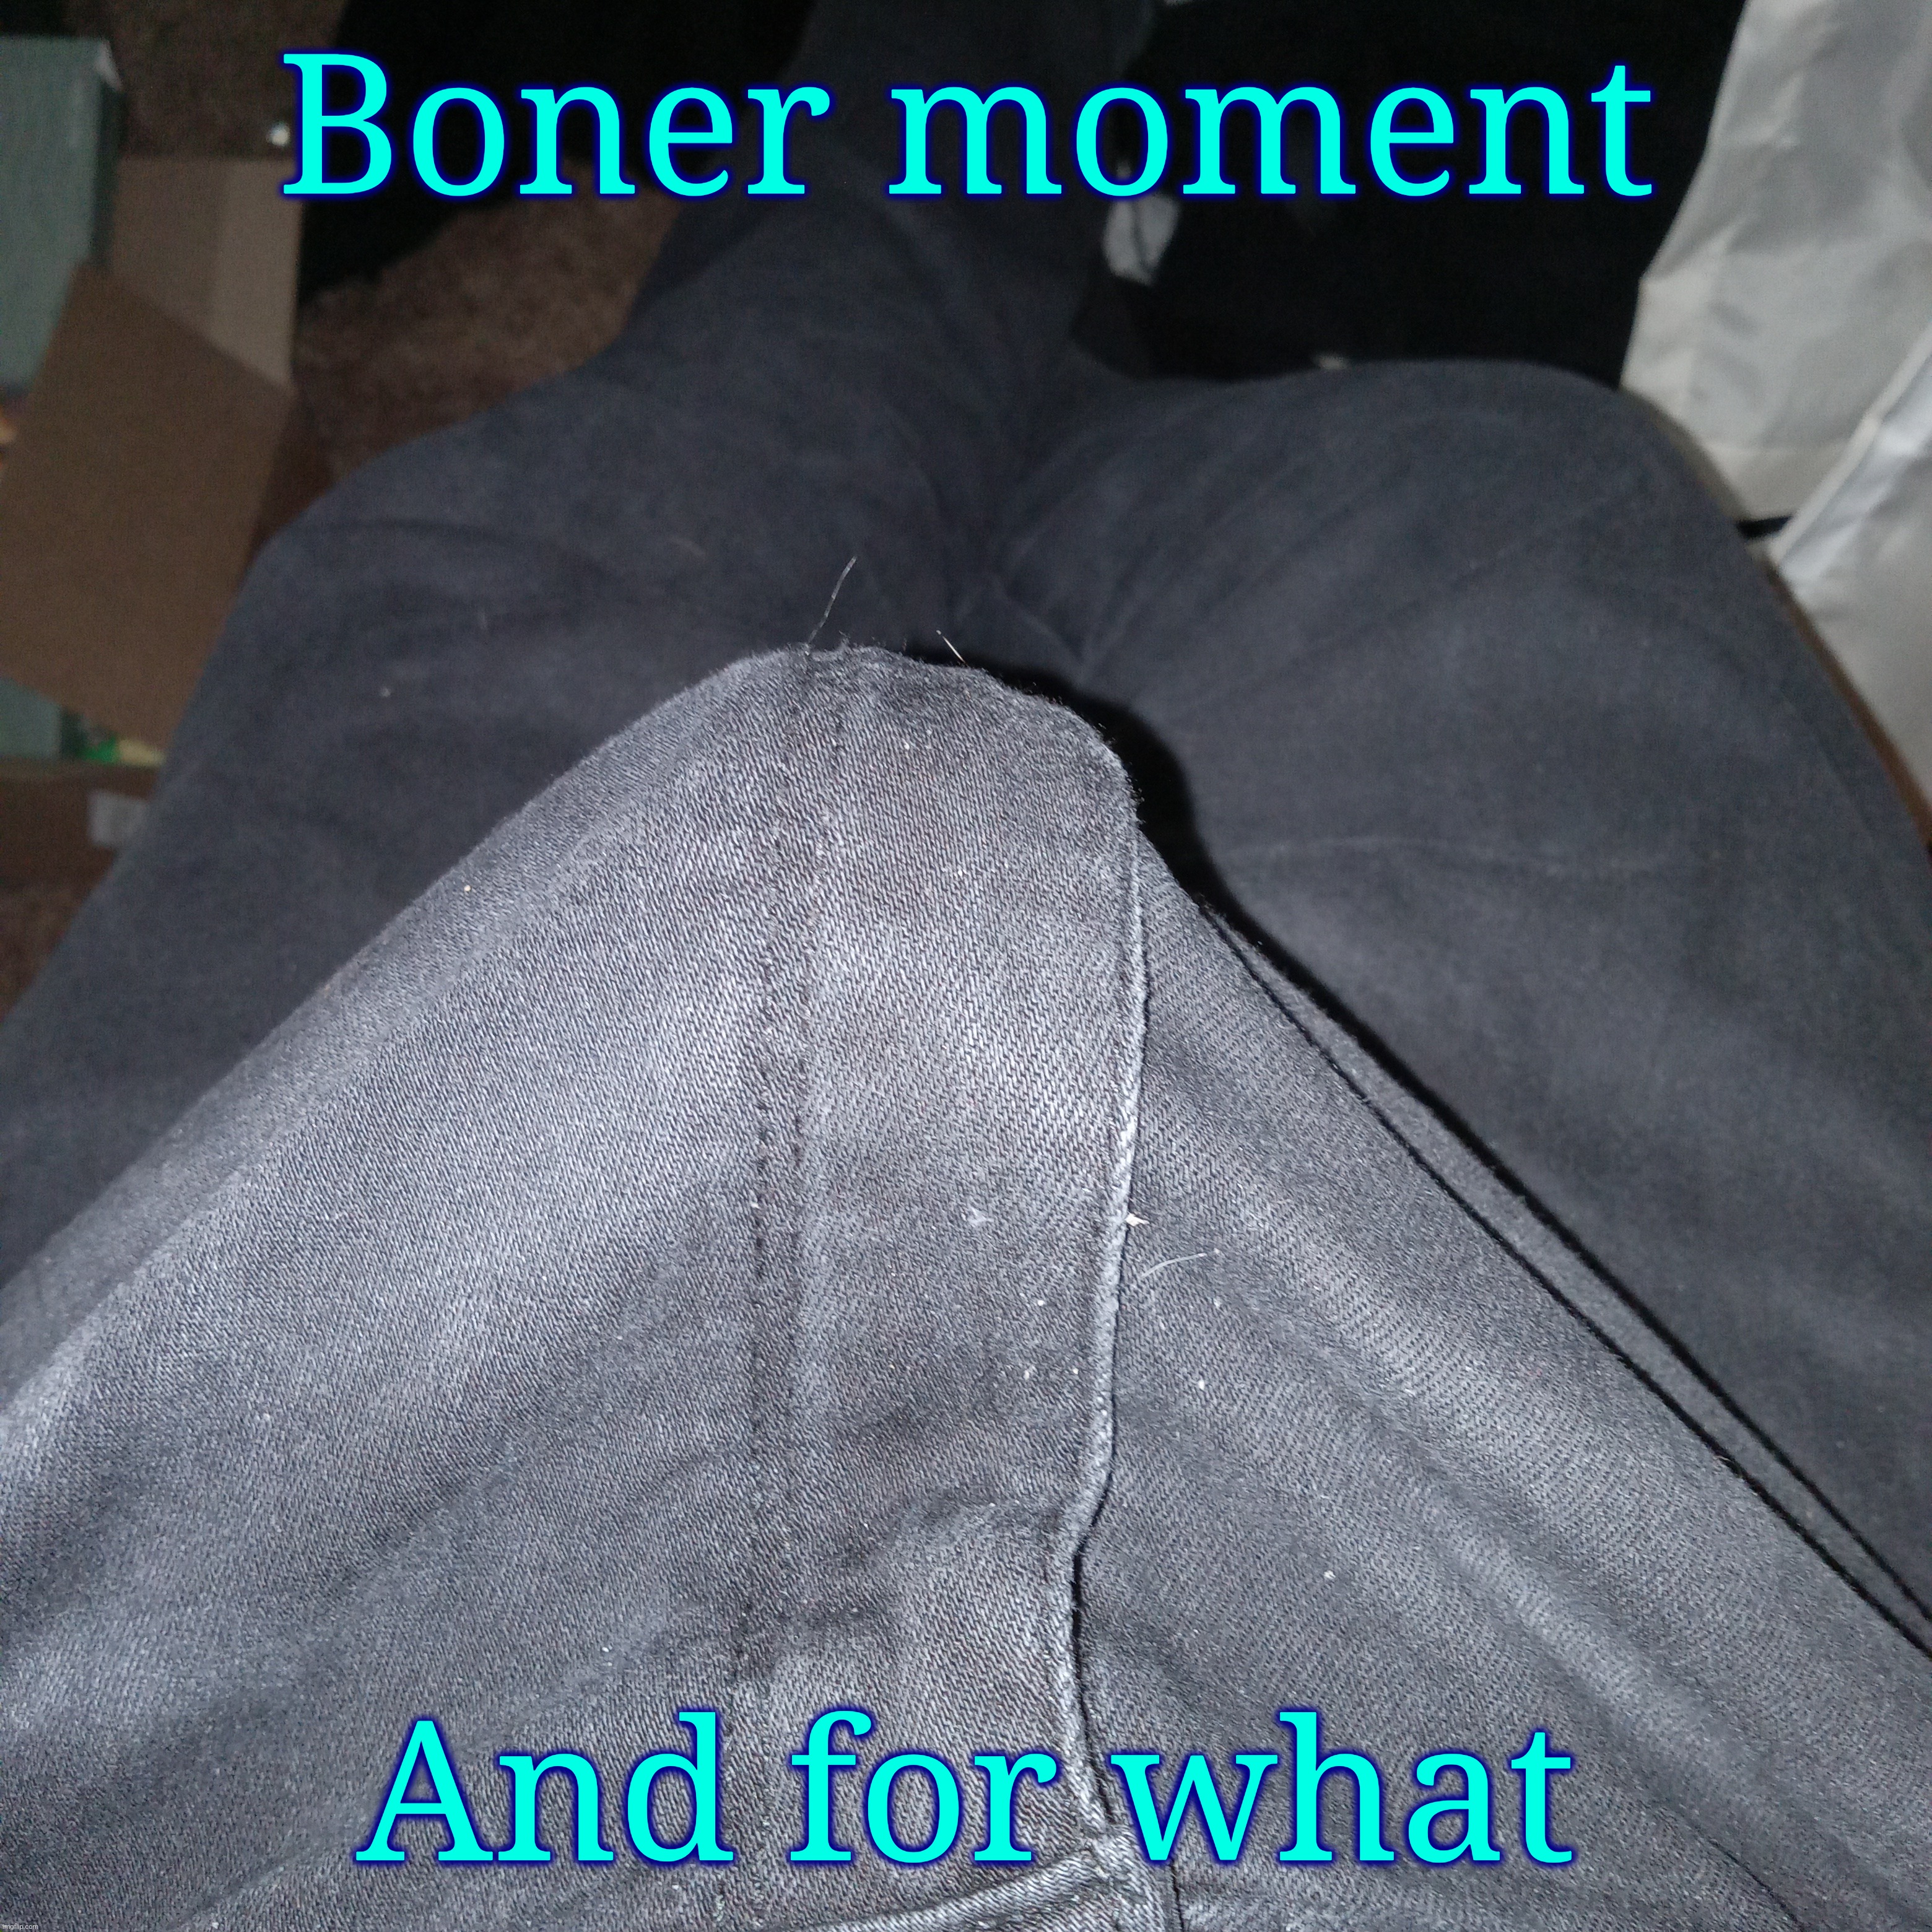 Boner moment; And for what | made w/ Imgflip meme maker